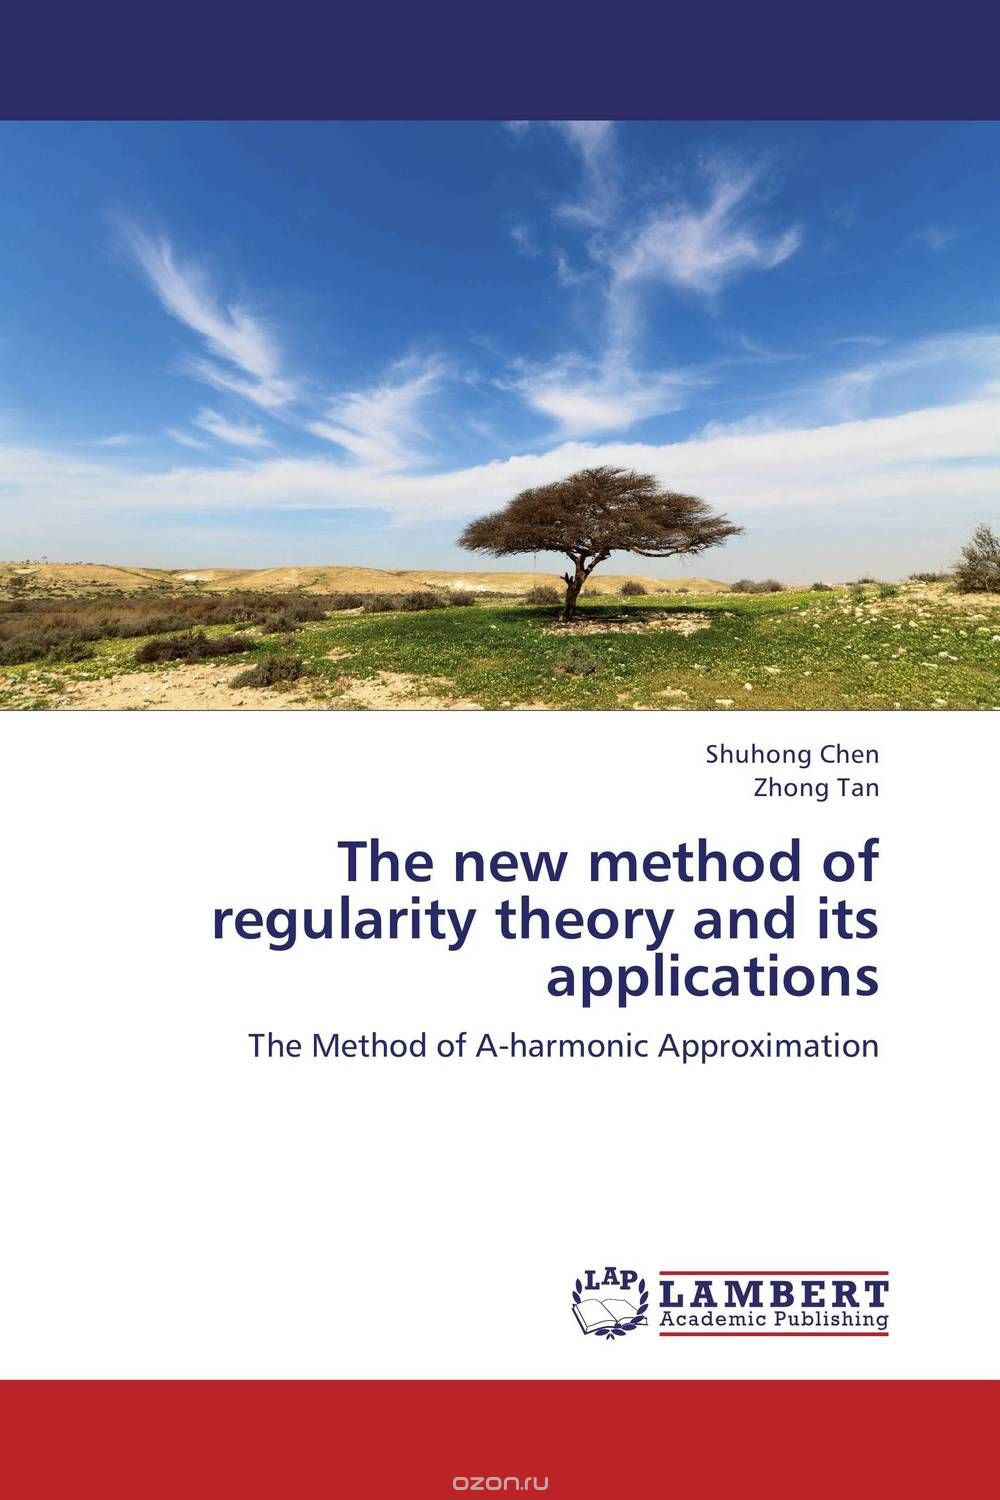 The new method of regularity theory and its applications